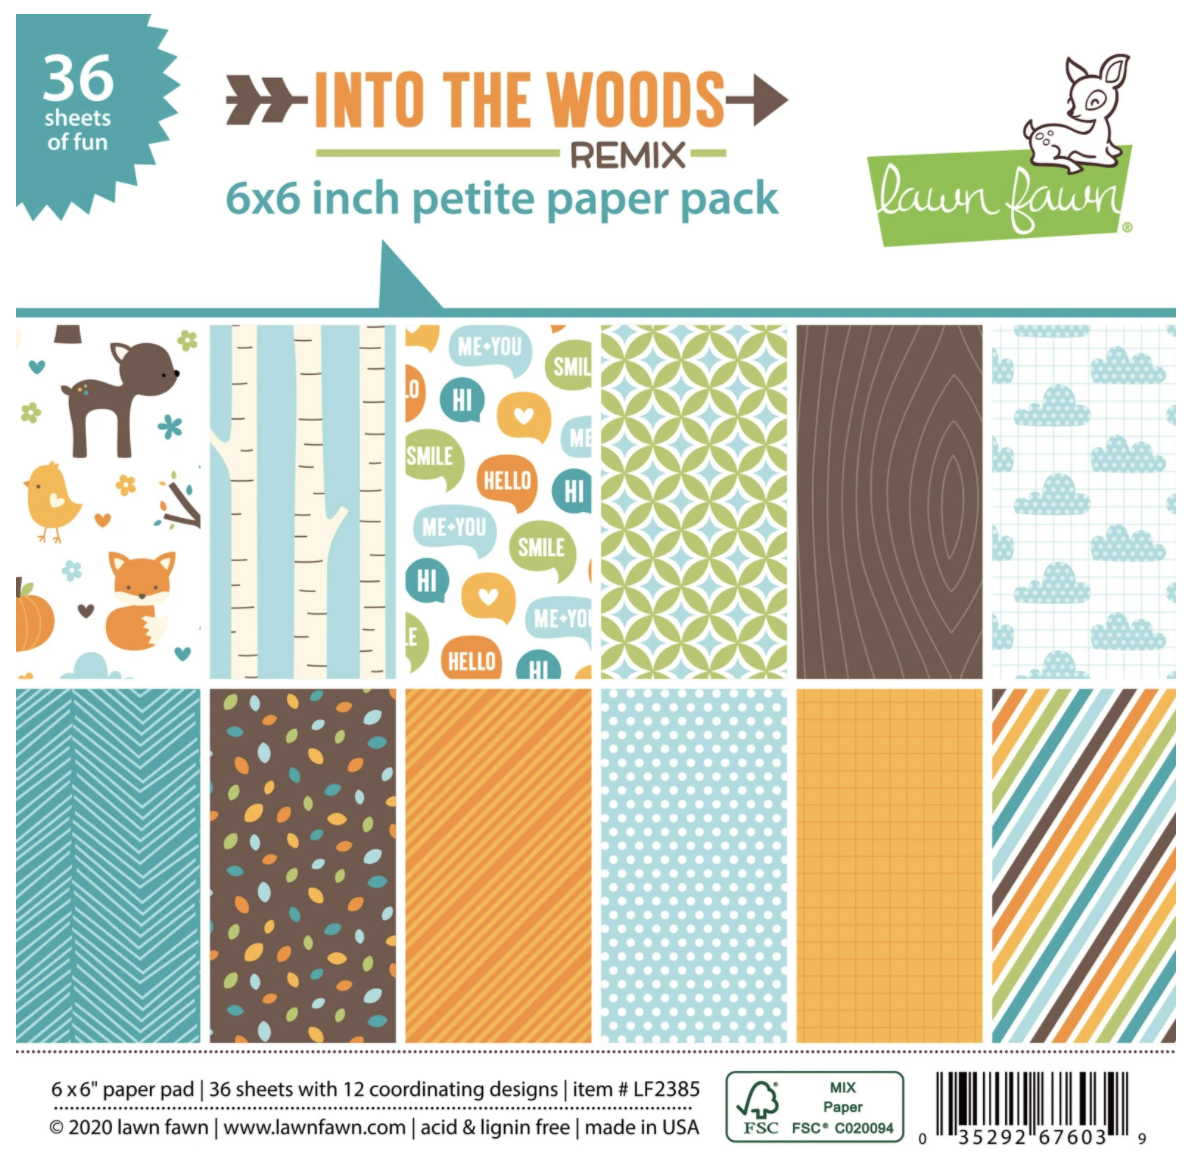 Lawn Fawn, Into The Woods Remix Petite Paper Pack